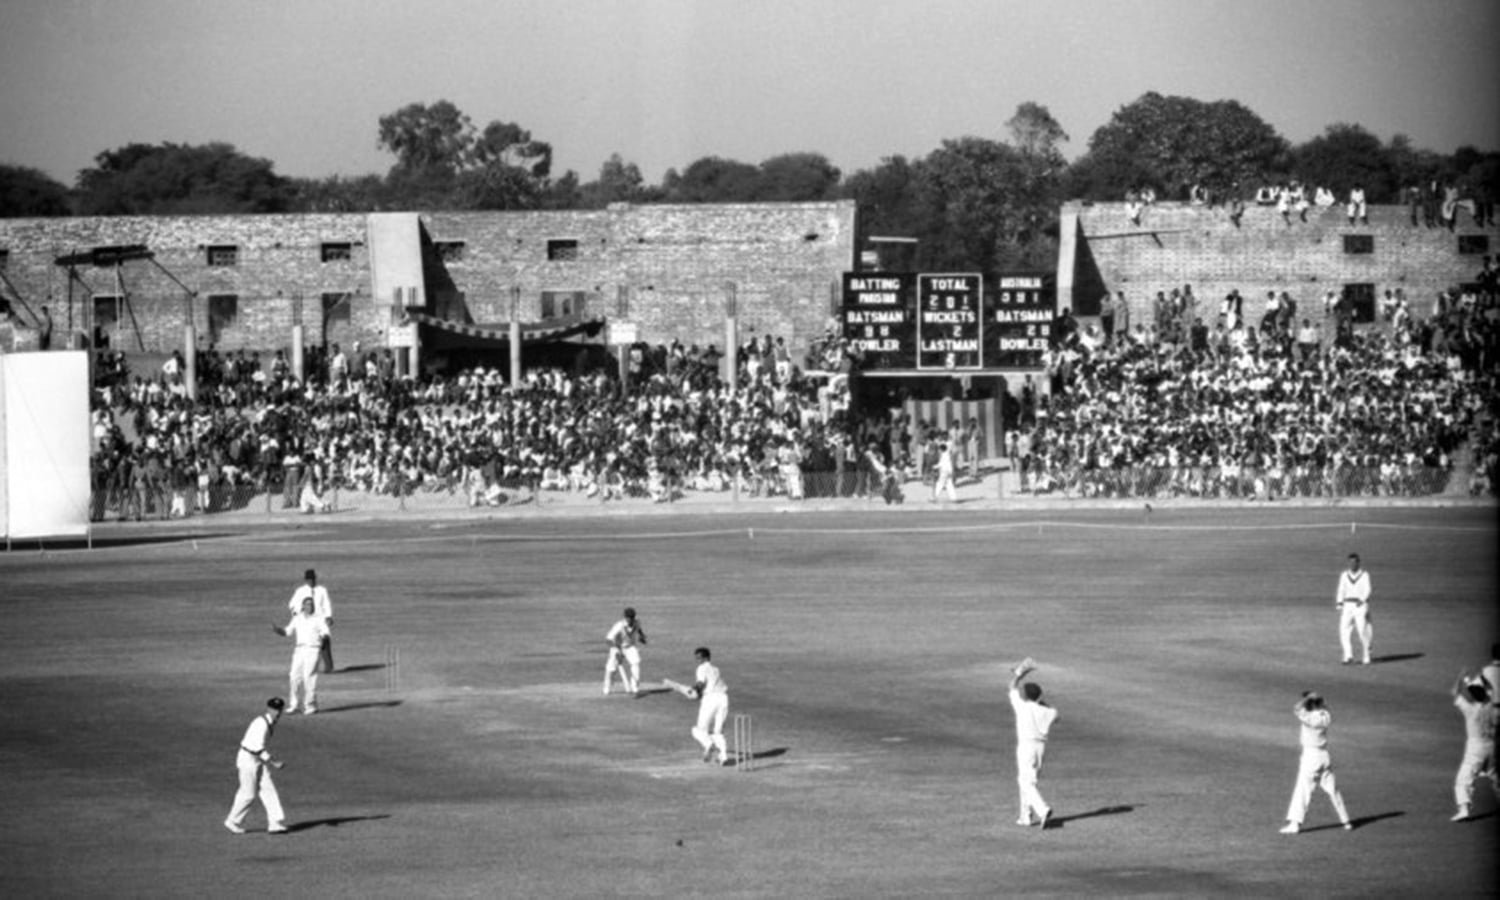 Let it be appreciated that the task of any historian or chronicler attempting to condense seventy years of Pakistan cricket into a few thousand words.